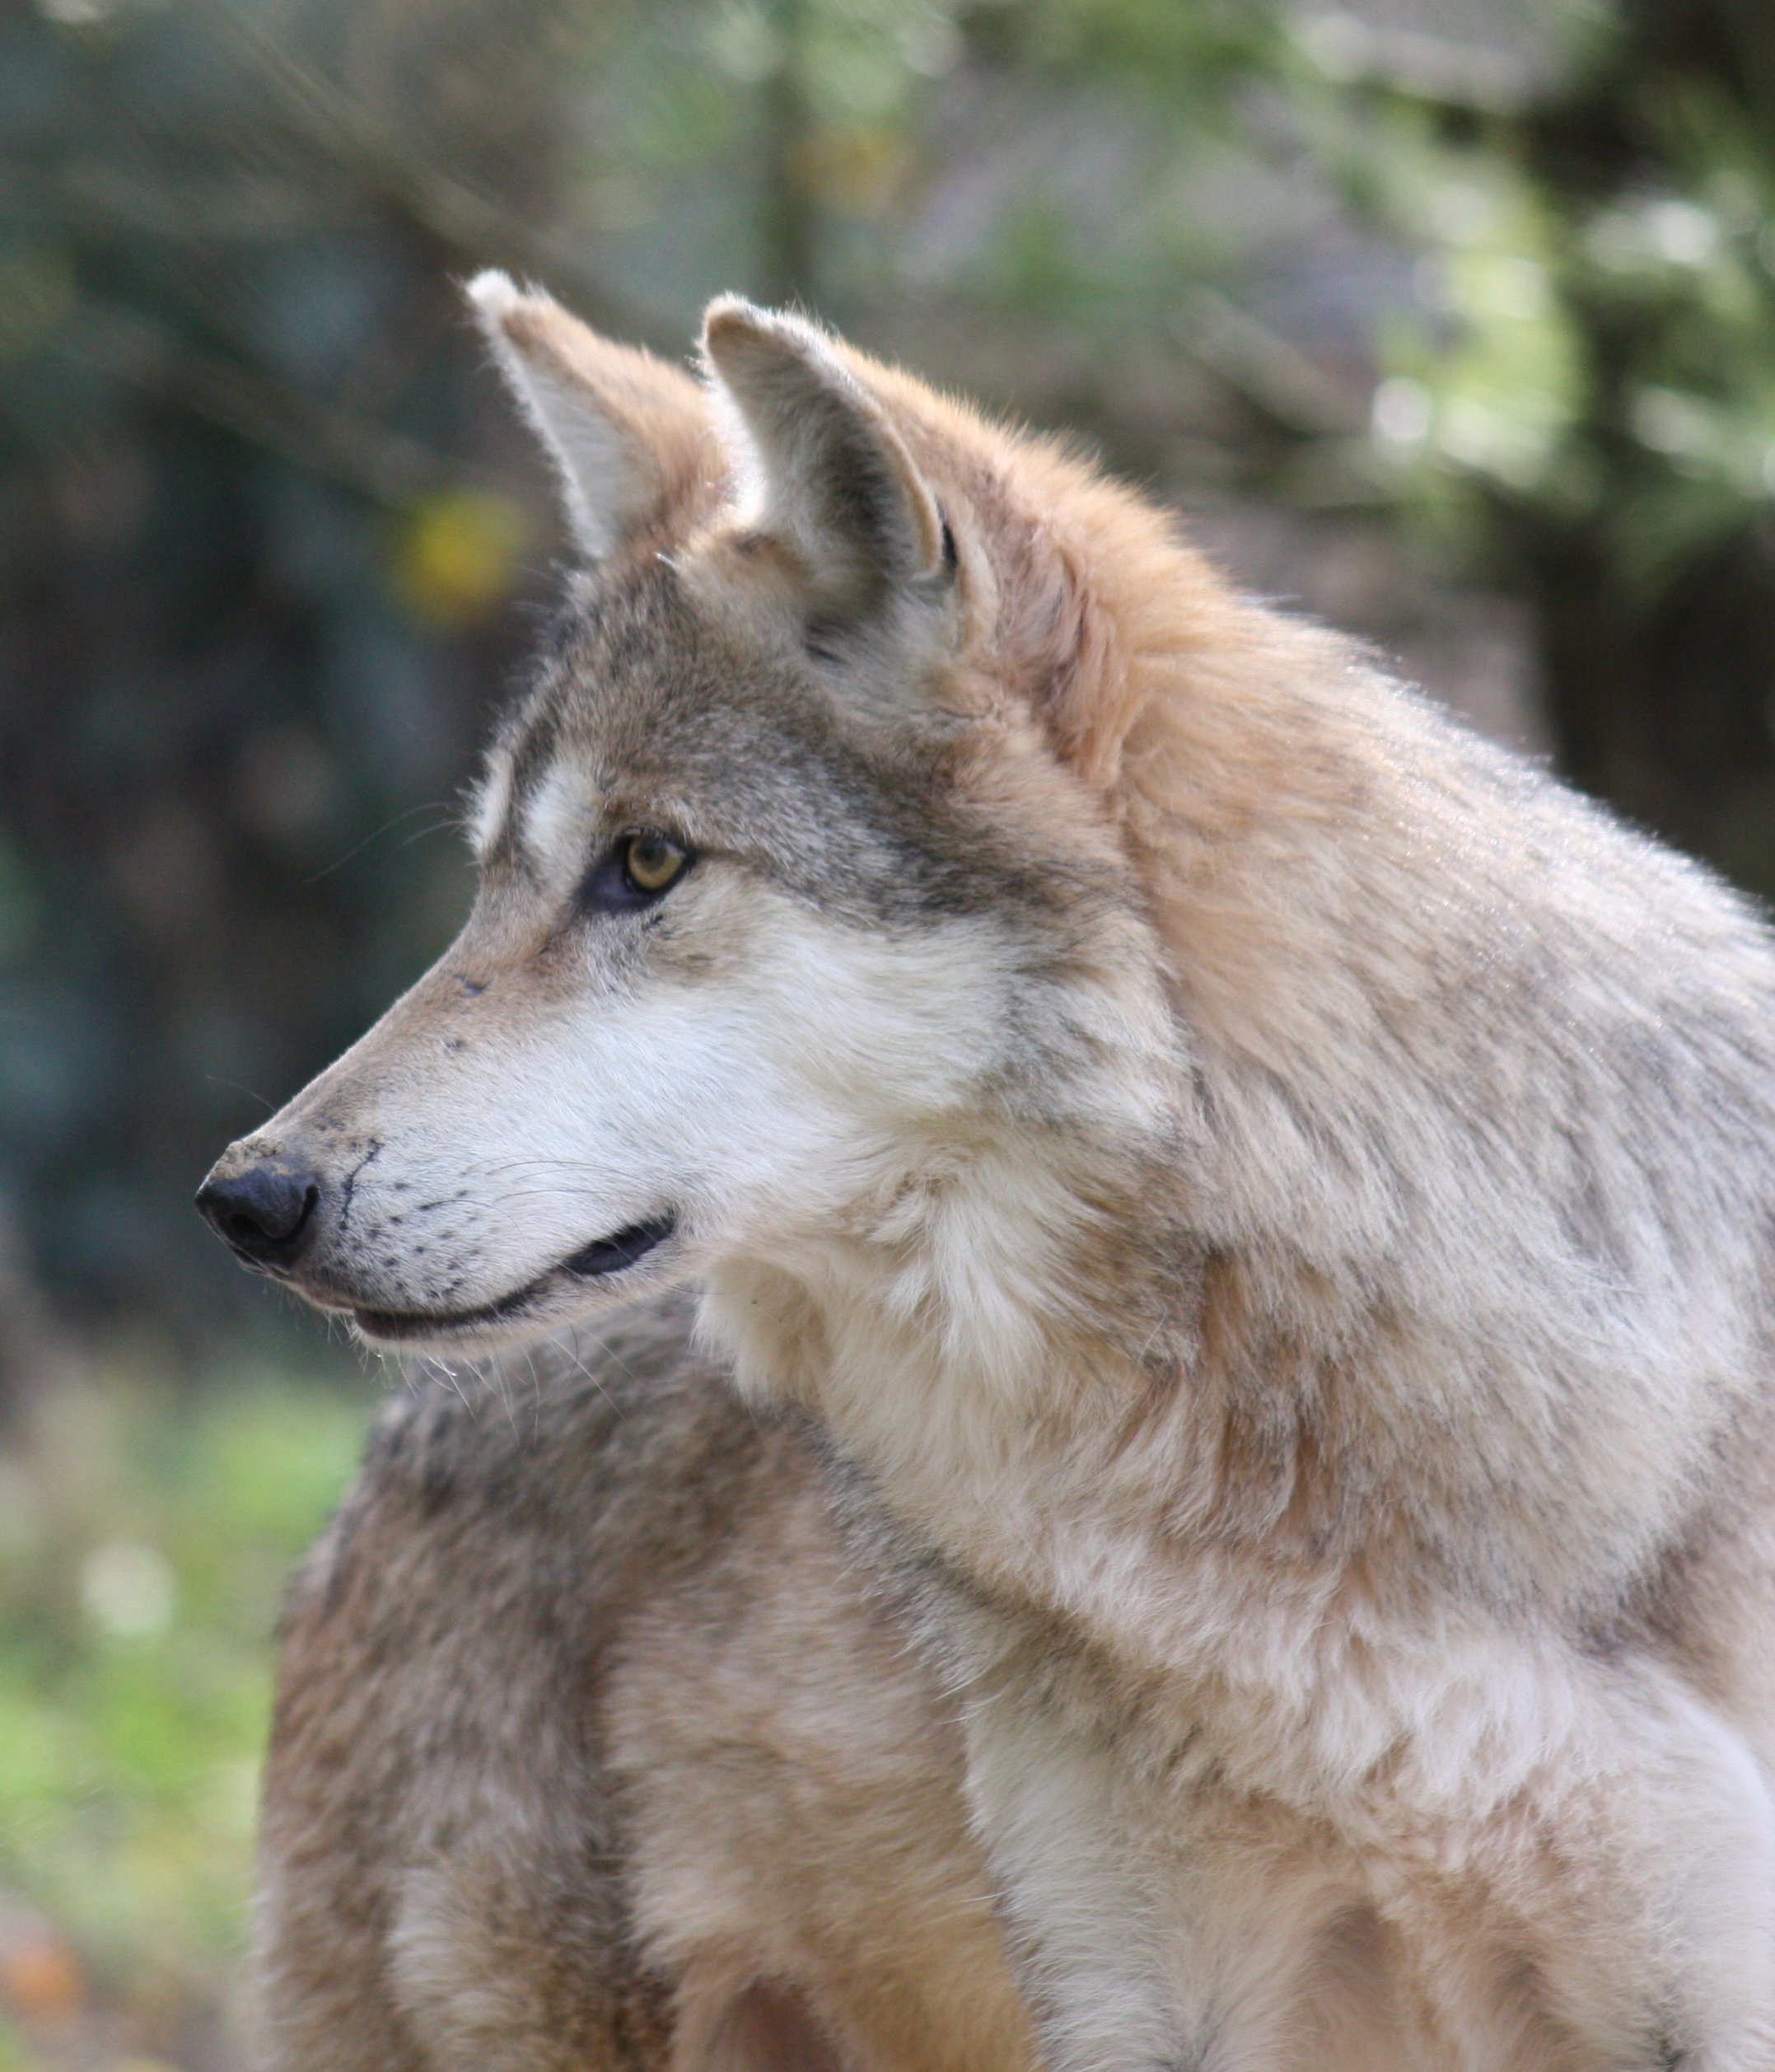 Predicted habitat availability does not address recovery success for Mexico’s Mexican wolves